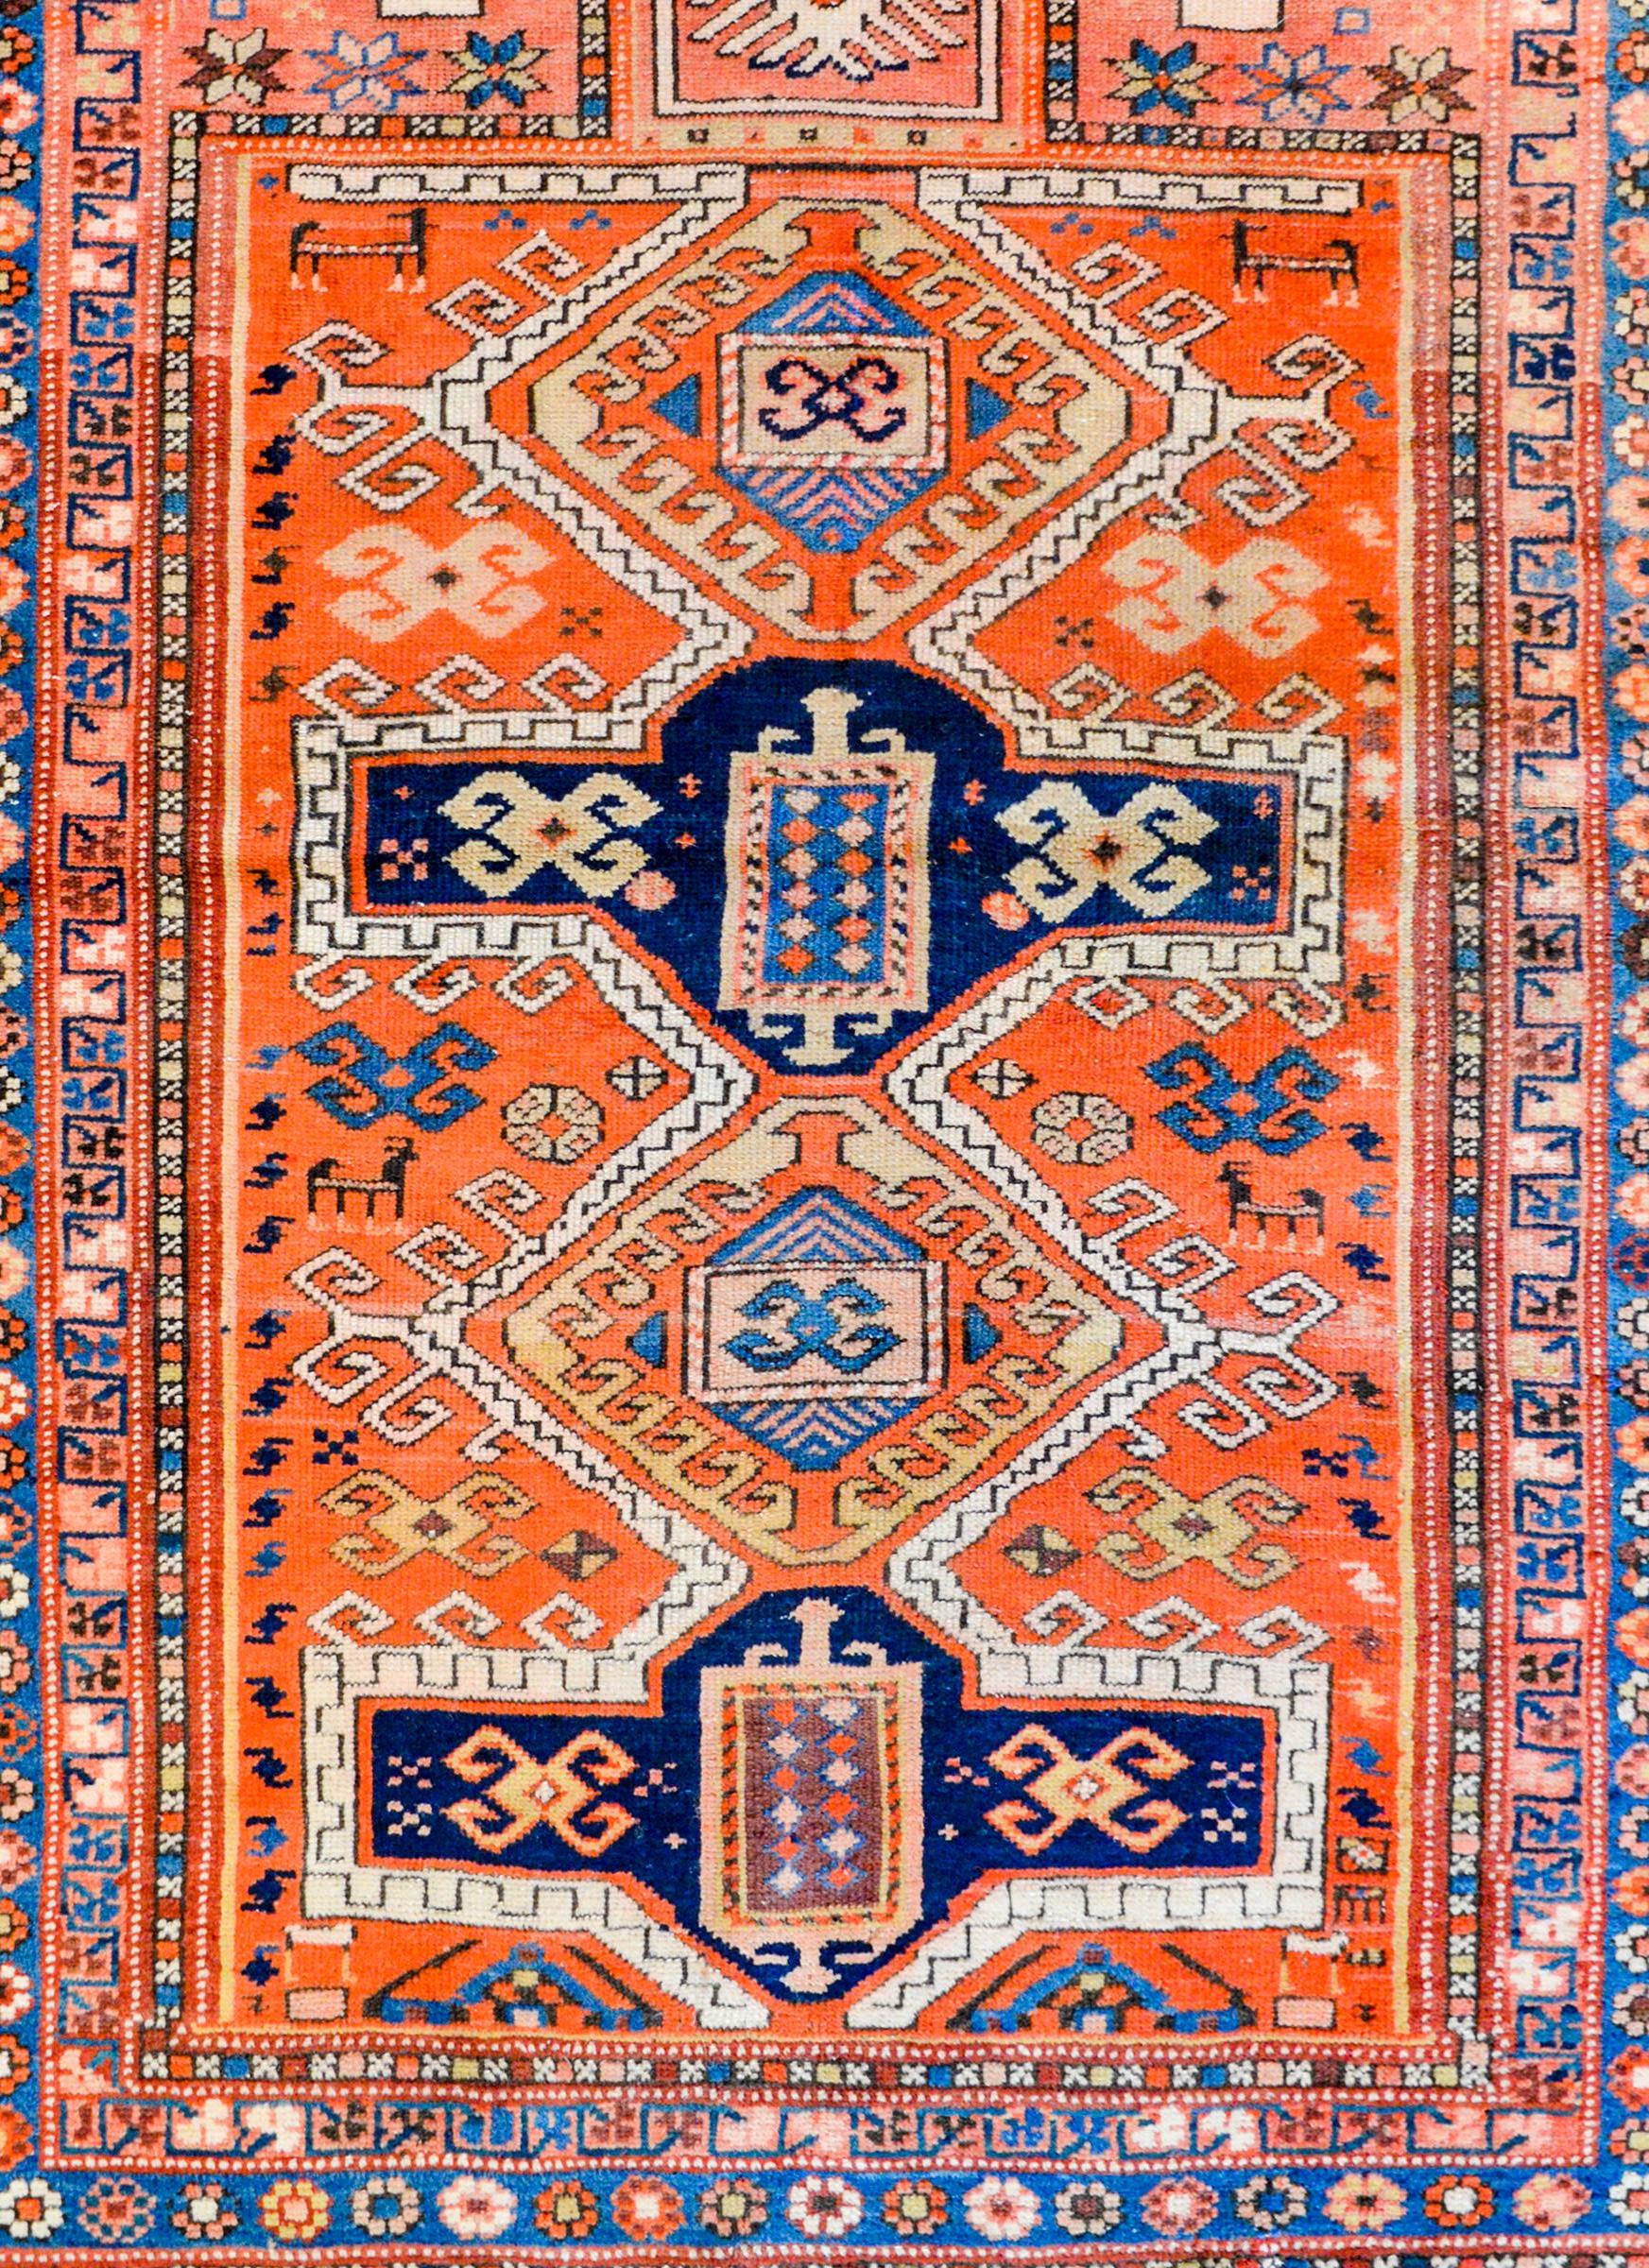 A wonderful early 20th century Persian Fachralo  Kazak prayer rug with four large stylized medallions with stylized flowers amidst a field of myriad stylized flowers with two hands on a crimson background surrounded by border containing multiple